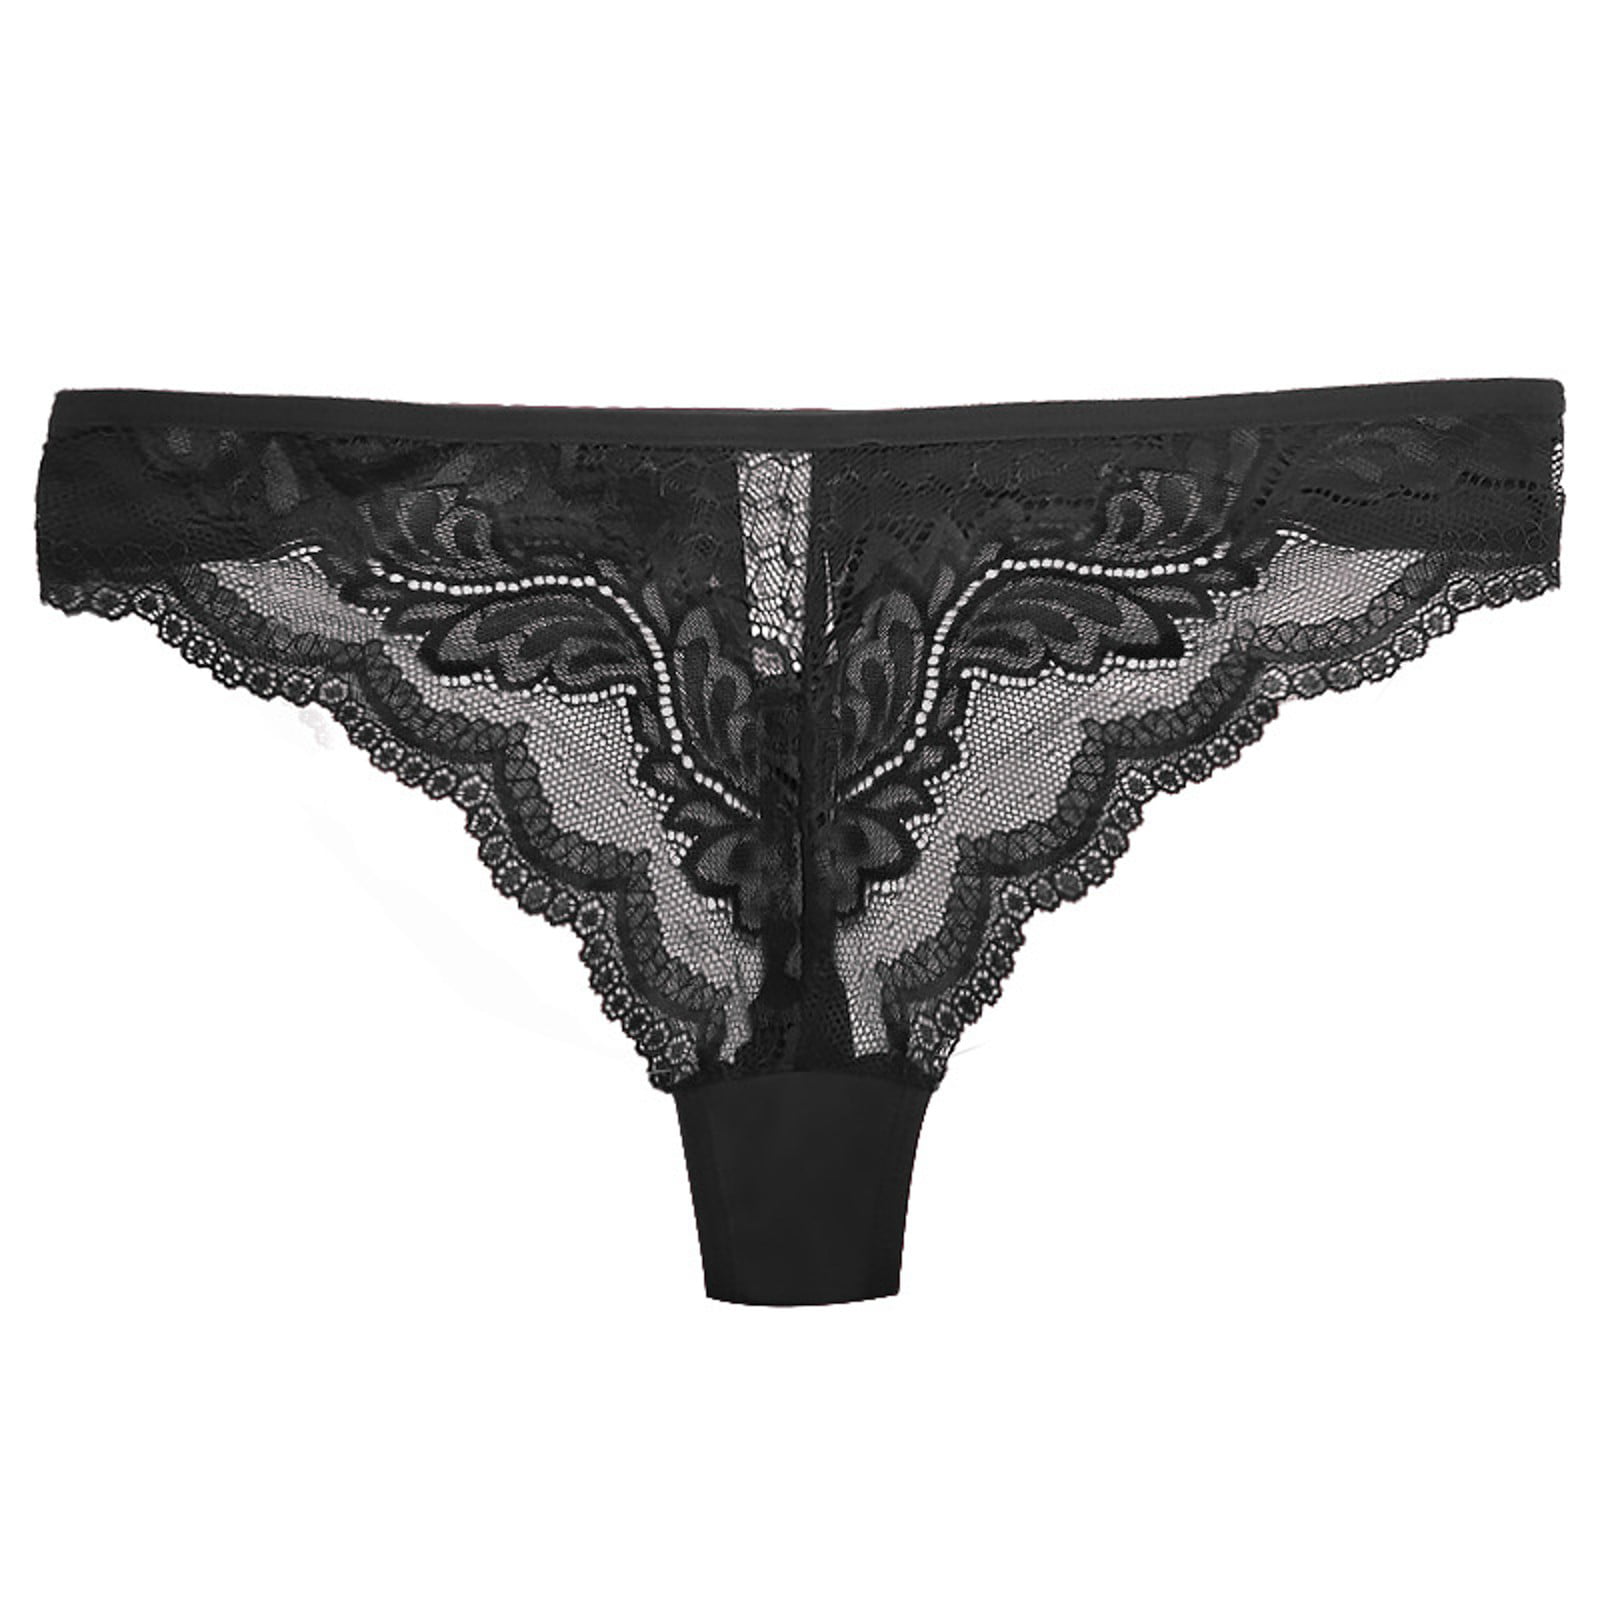 Panic Panties Underwear L/XL Black Lace Thong - Delivered In As